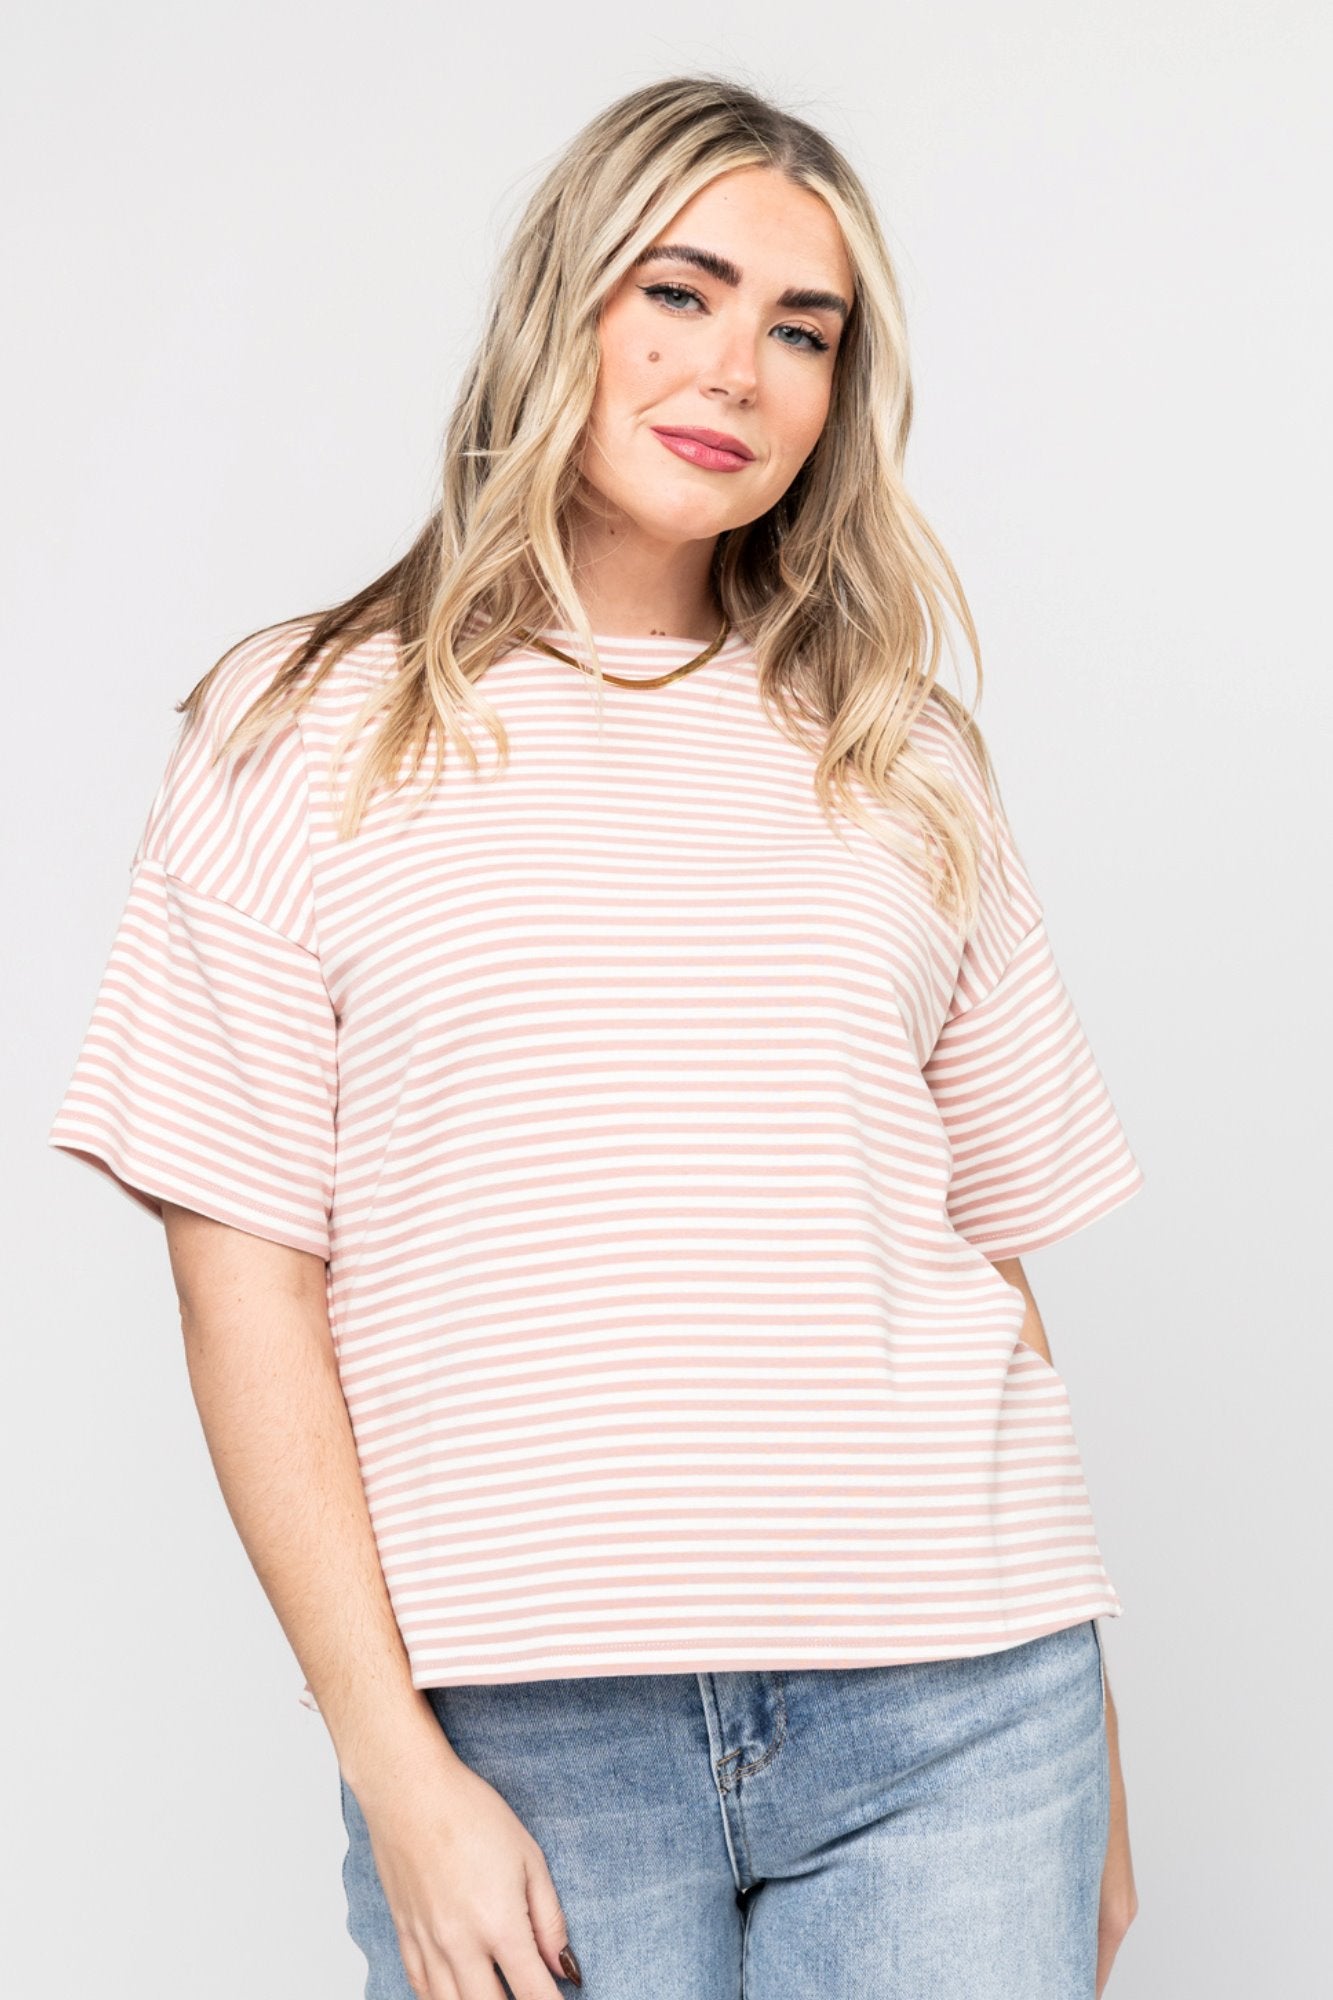 Bliss Tee in Blush Holley Girl 